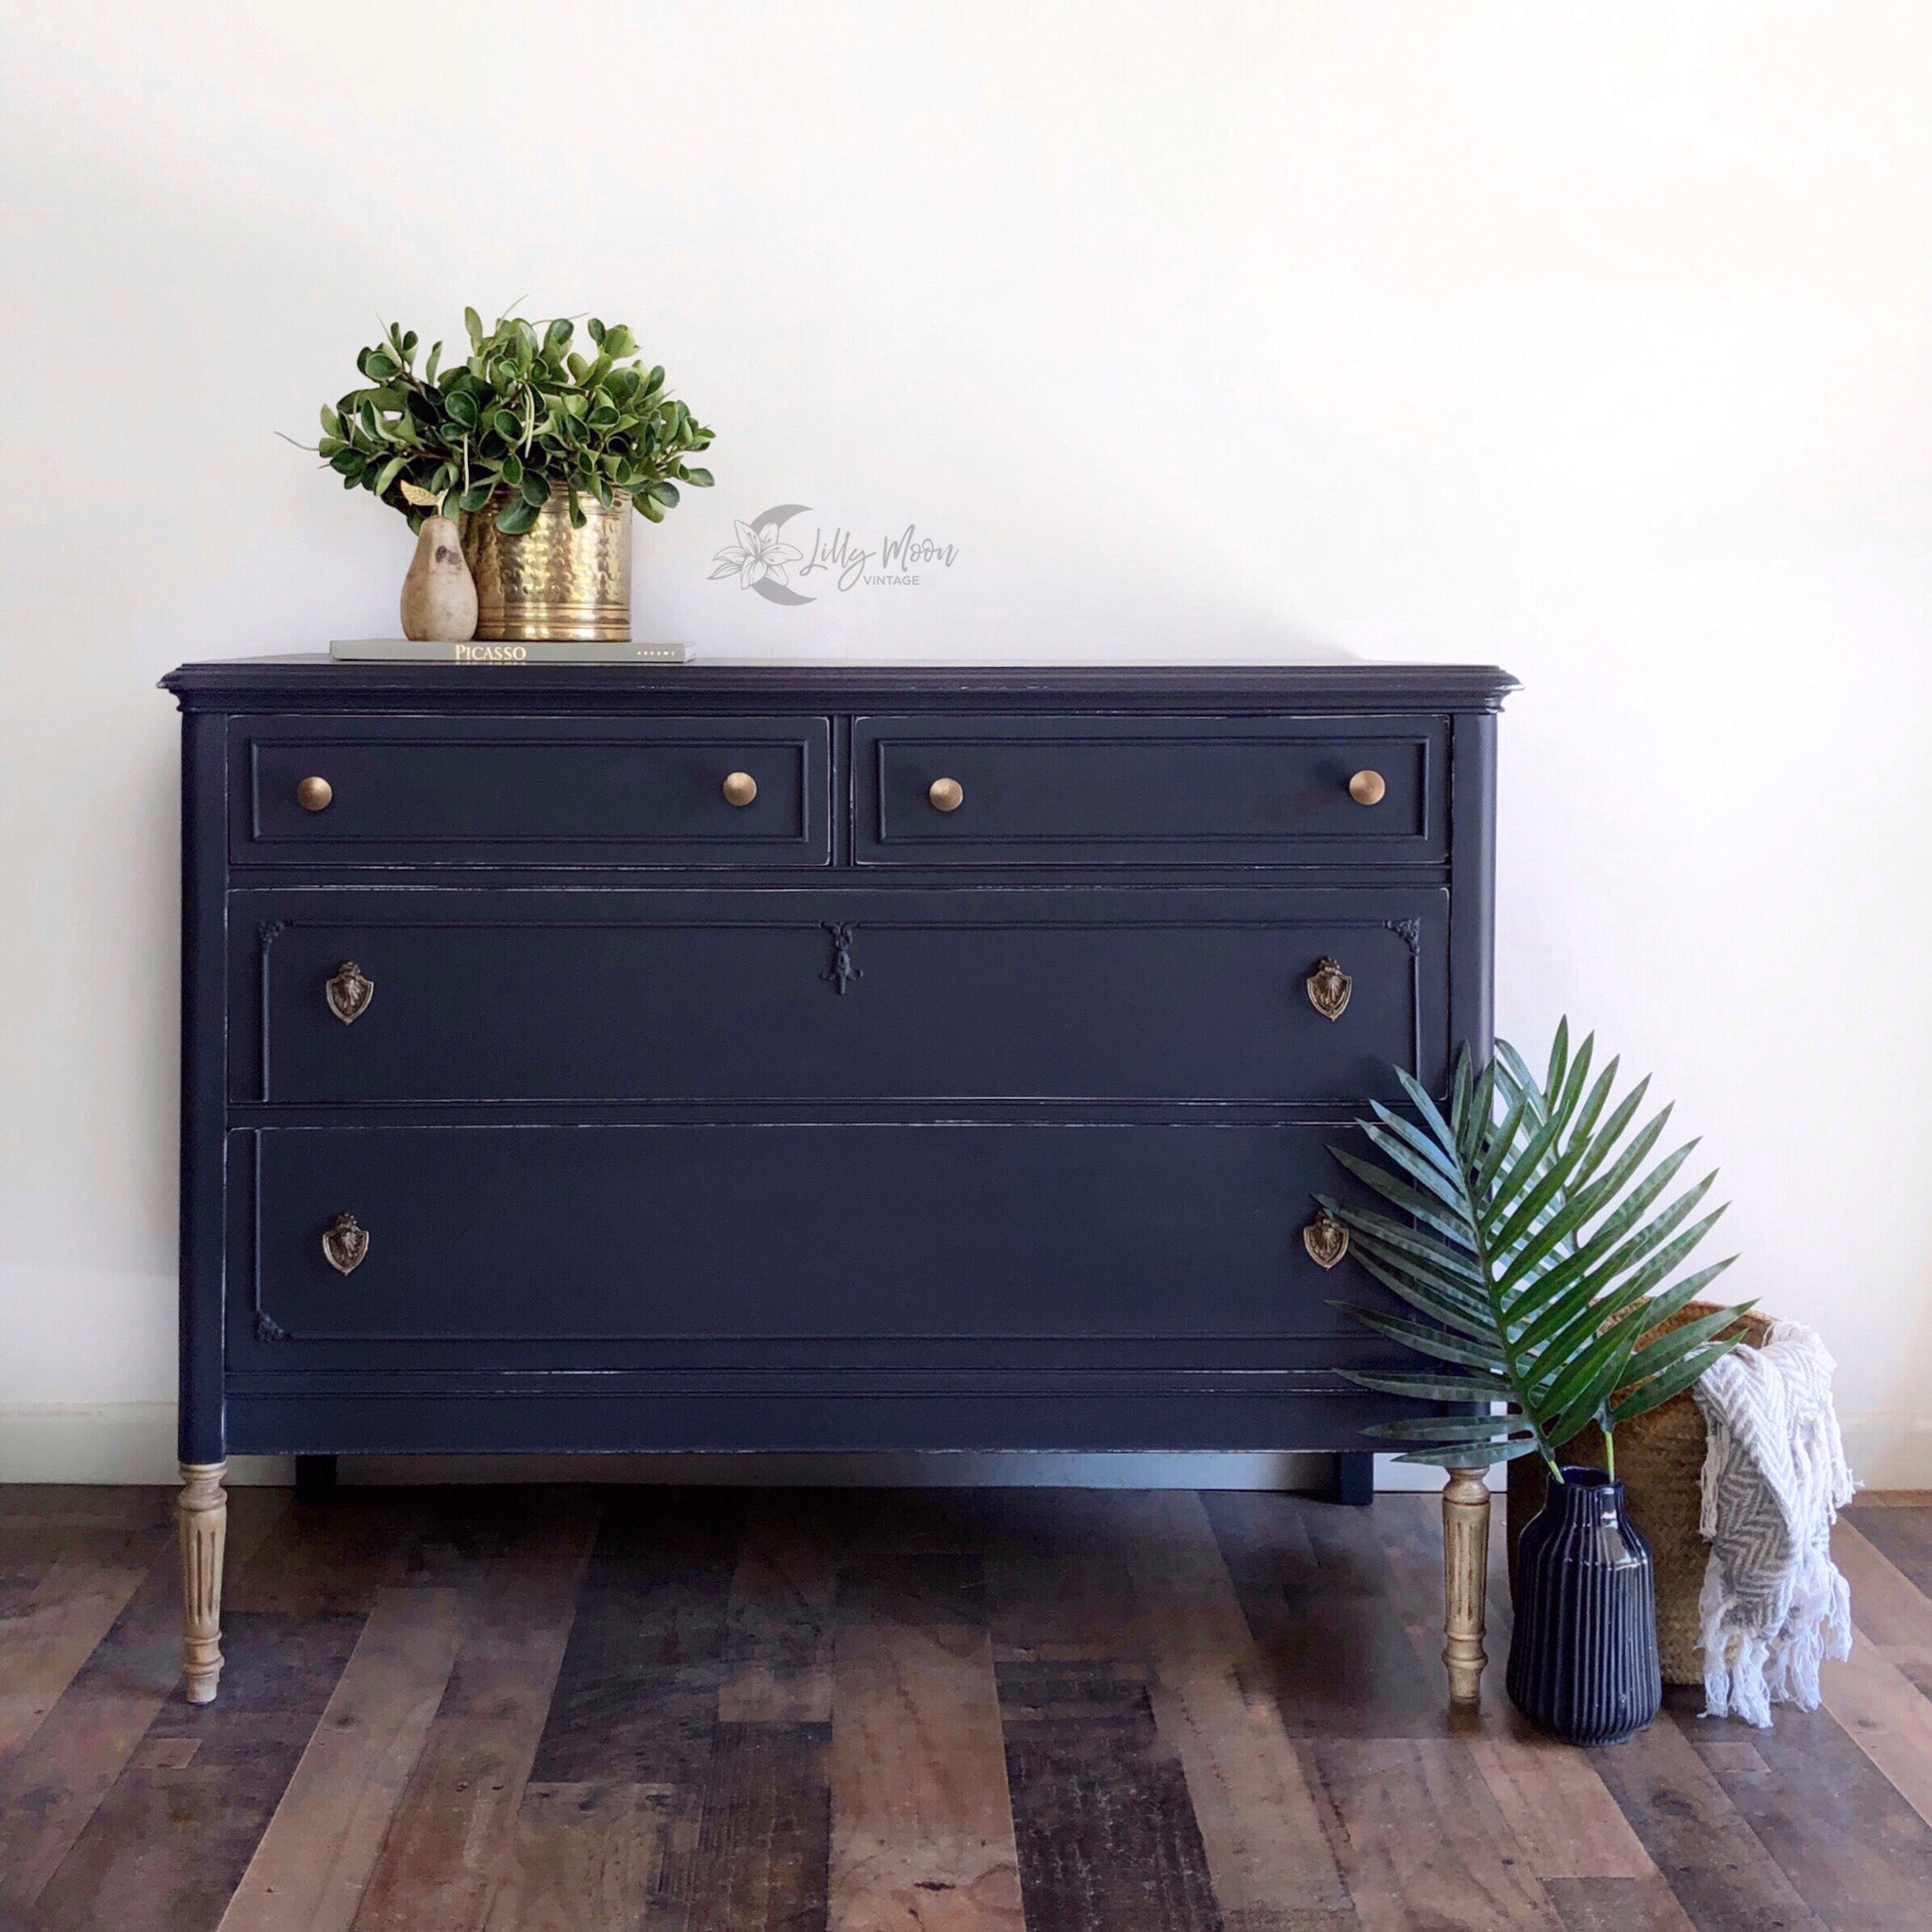 A vintage 4-drawer dresser refurbished by Lilly Moon Vintage is painted in Dixie Belle's In the Navy chalk mineral paint.